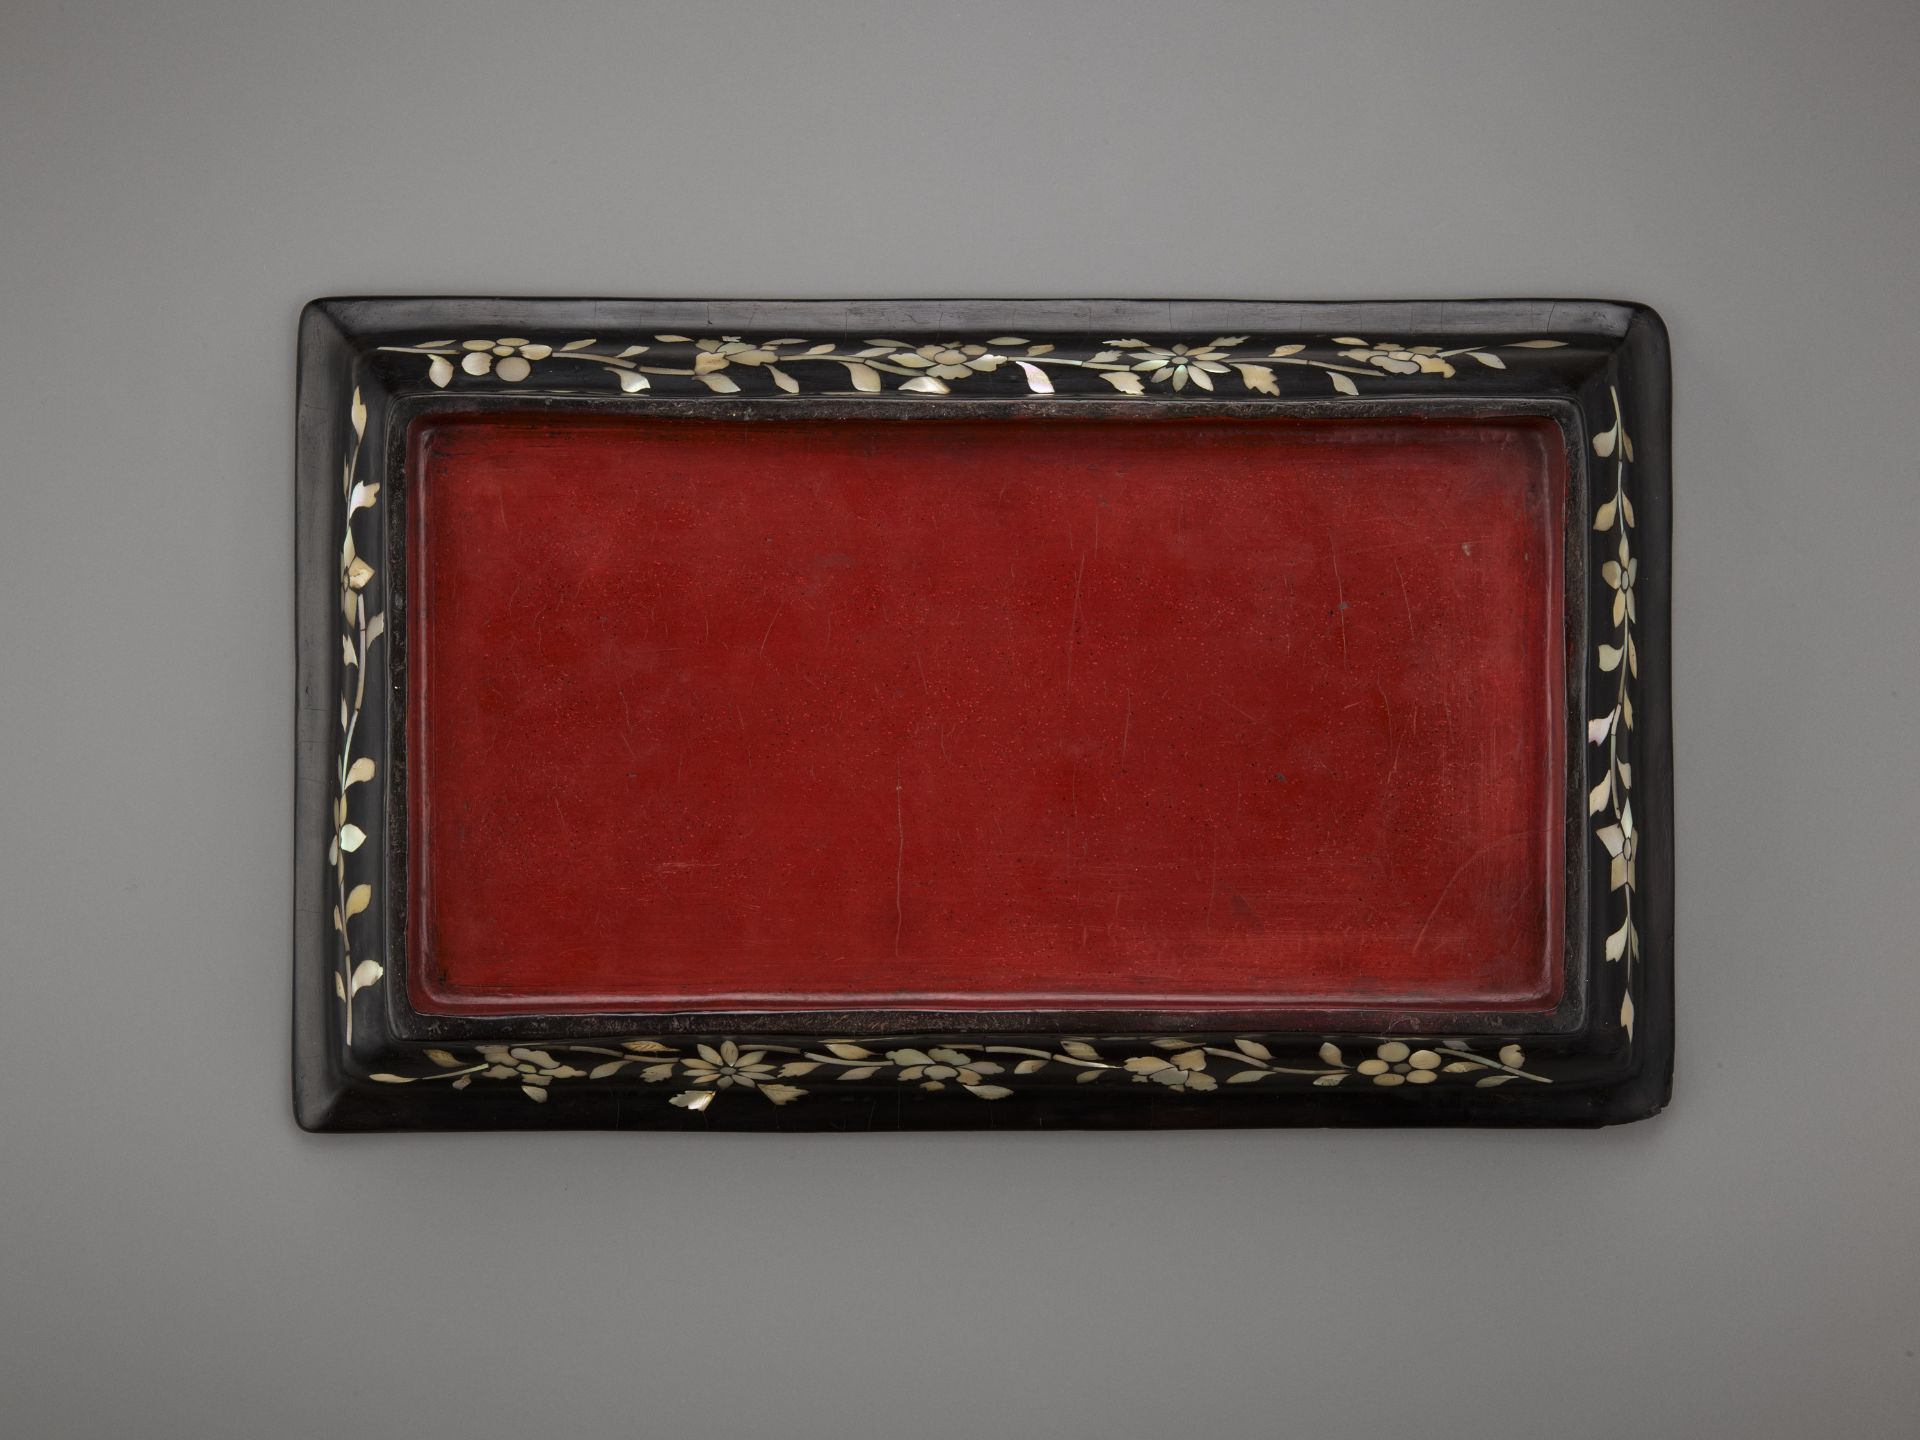 A MOTHER-OF-PEARL-INLAID BLACK LACQUER RECTANGULAR TRAY, JOSEON DYNASTY - Image 8 of 10